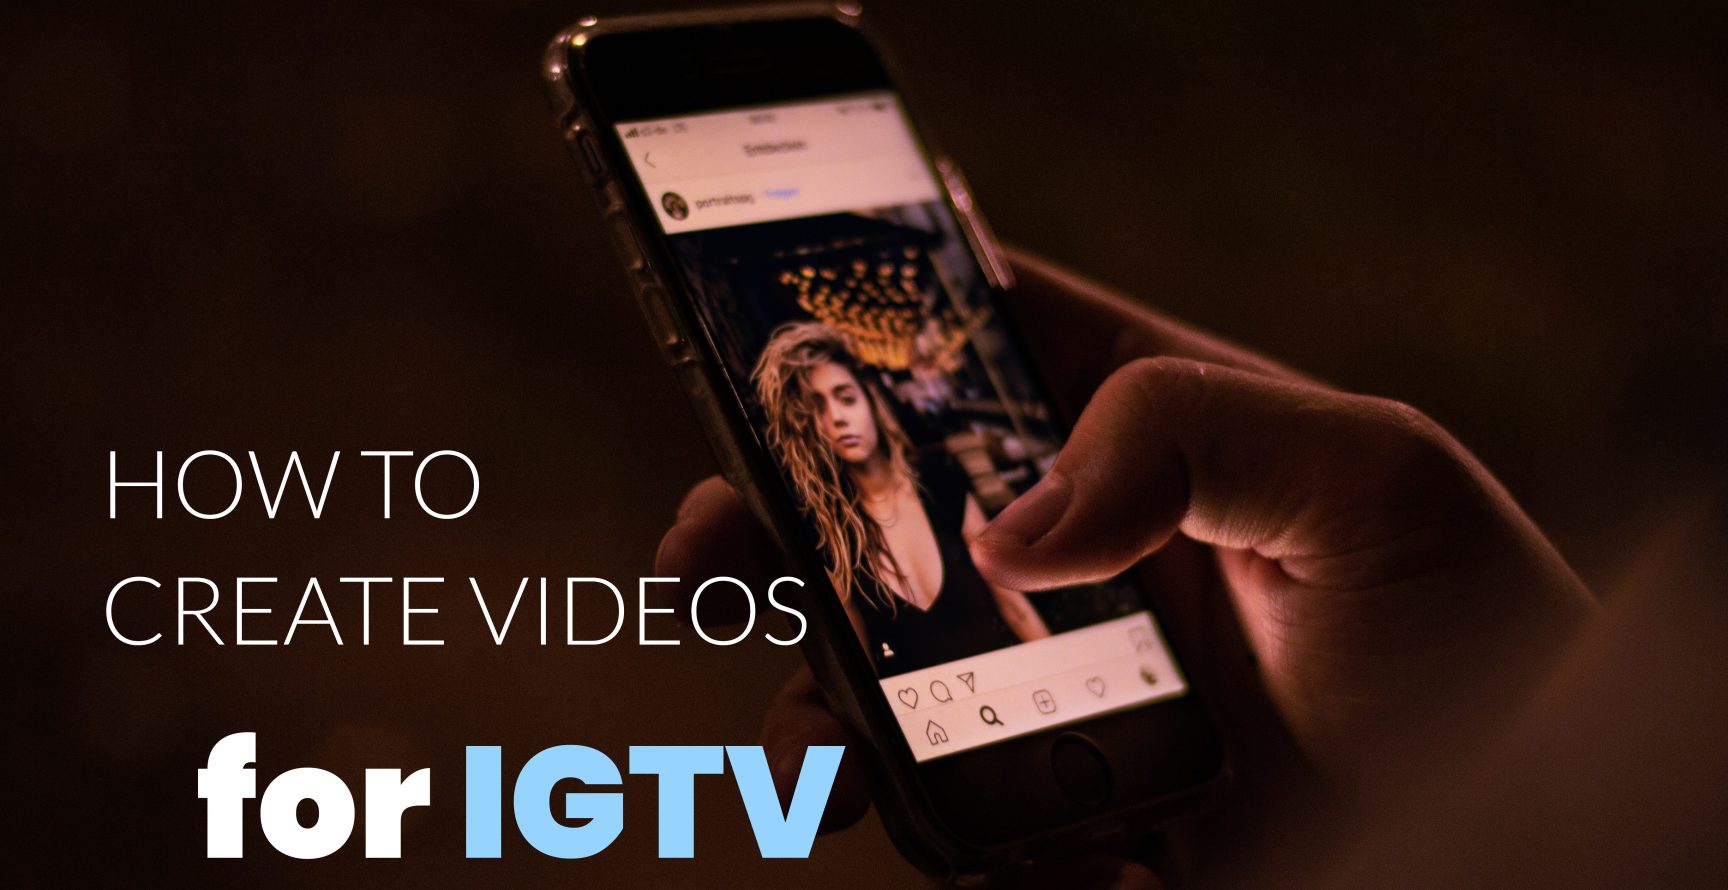 How to Create Videos for IGTV - Man holds smartphone with Instagram app